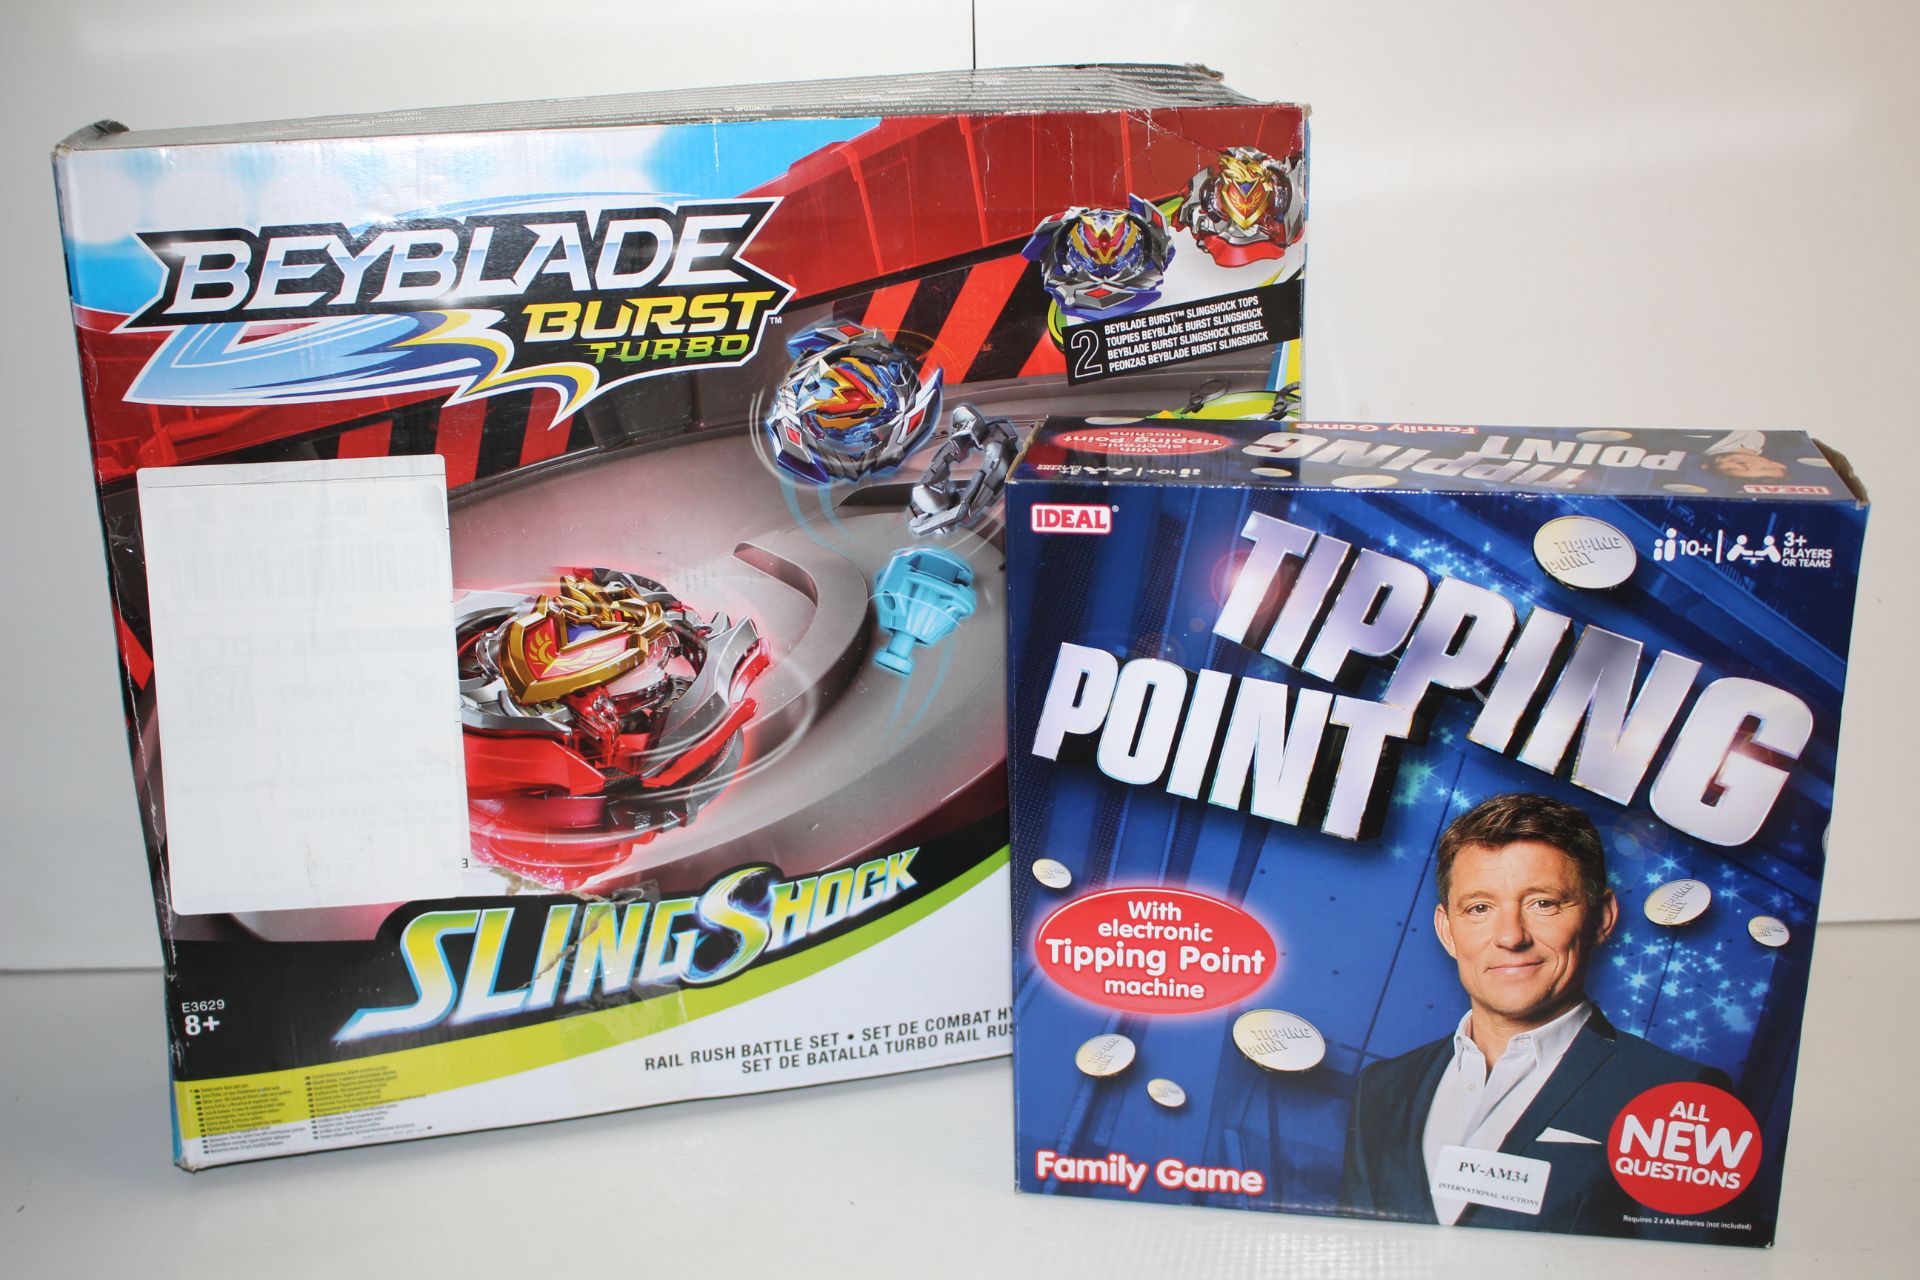 2X BOXED TOYS TO INCLUDE BEBLADE BURST TURBO & TIPPING POINT BOARD GAMECondition ReportAppraisal